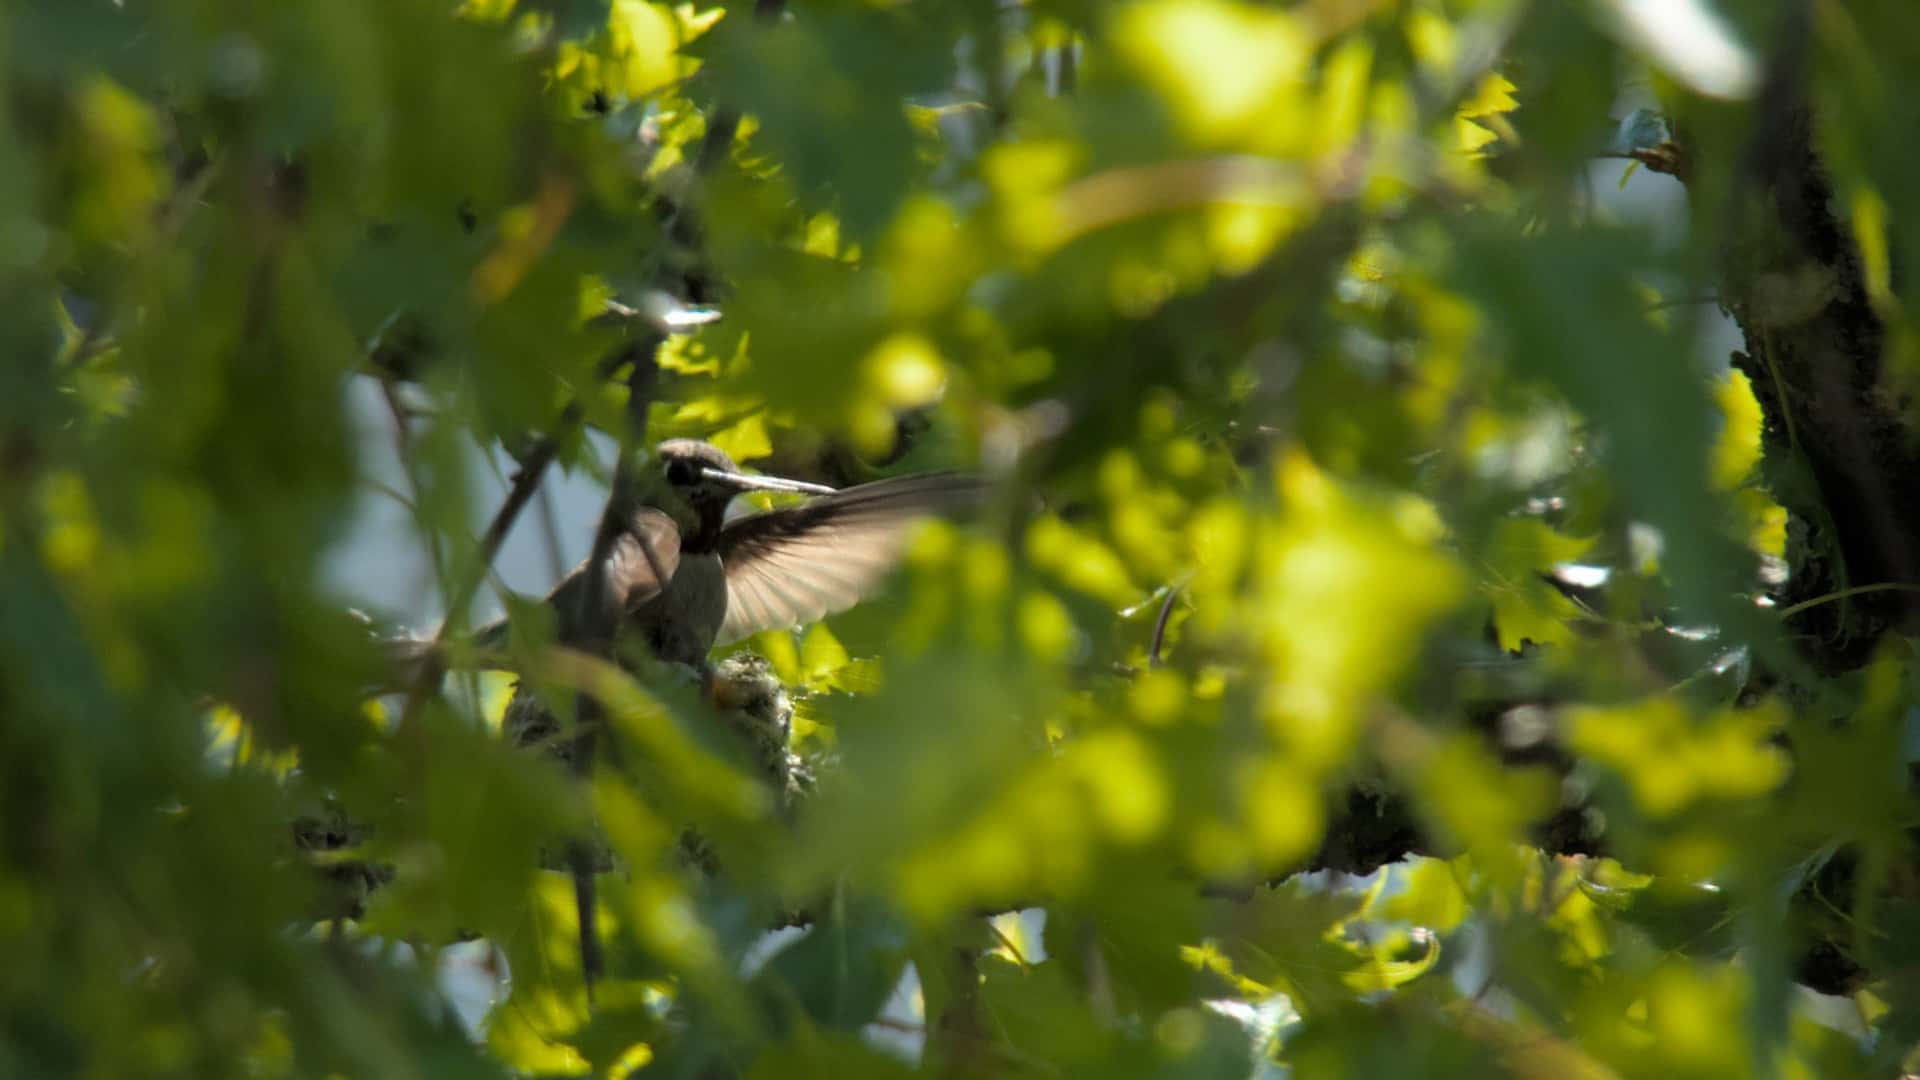 a hummingbird lands in a nest shrouded by foliage